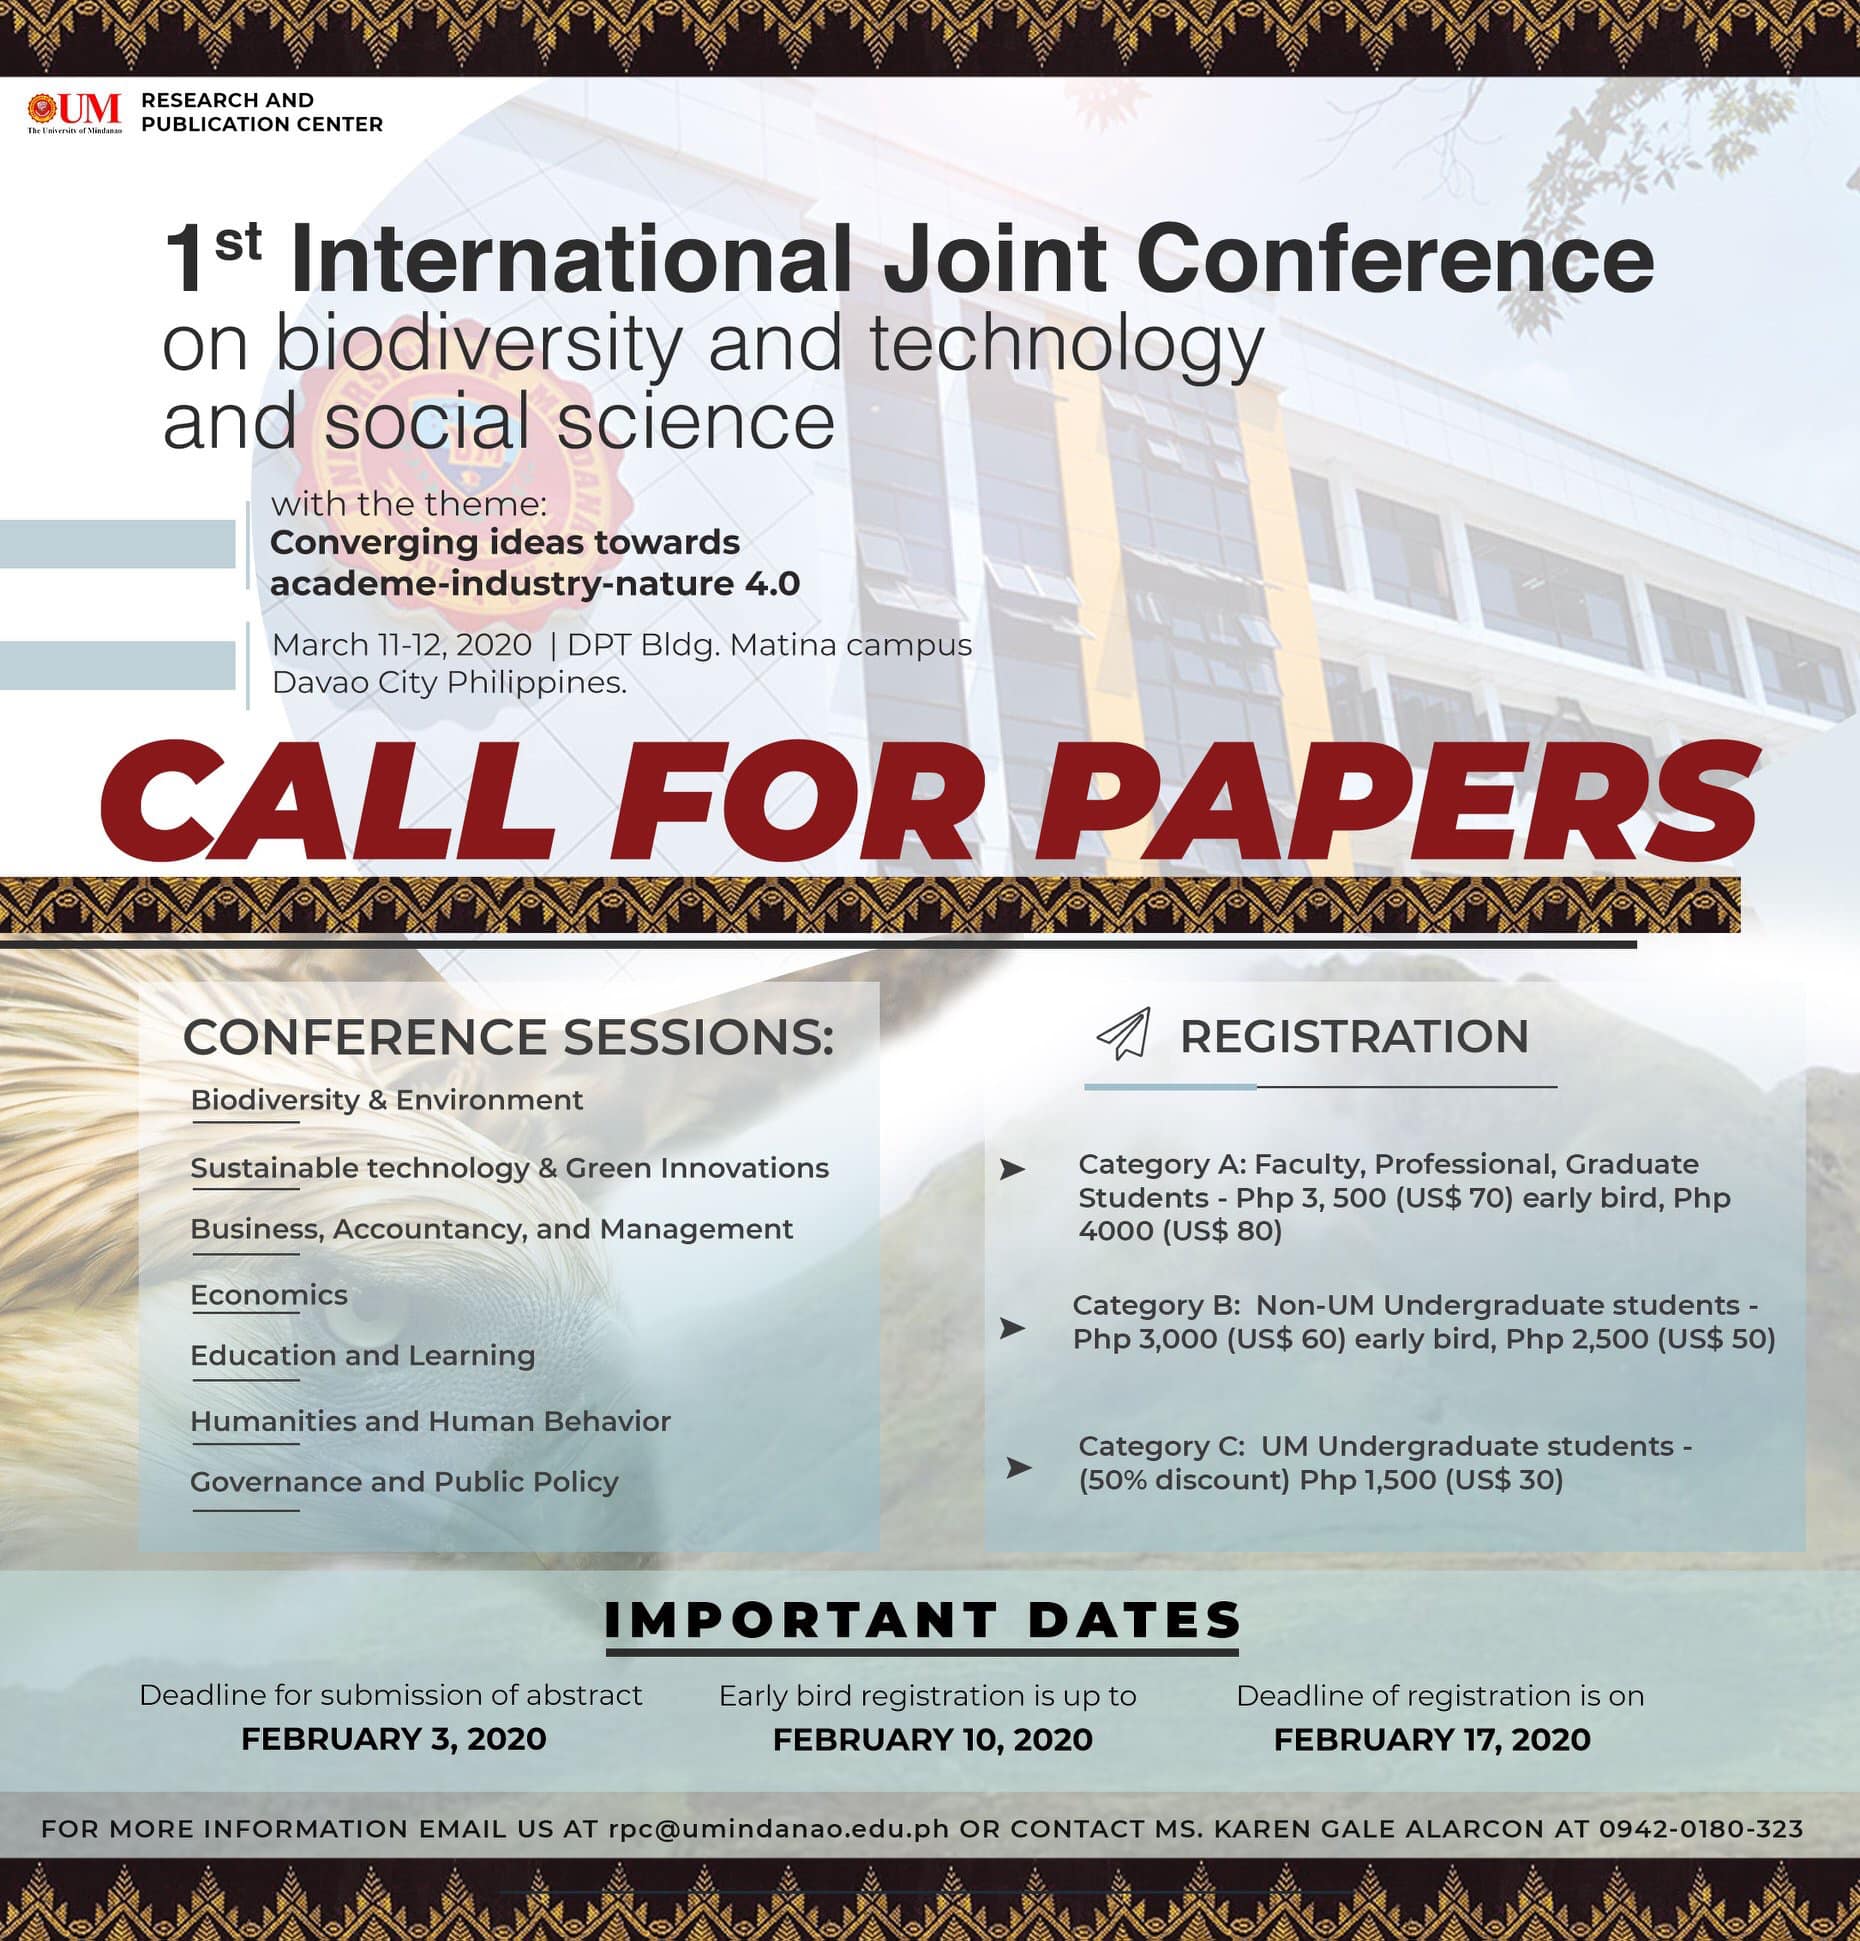 CALL FOR PAPERS: 1st International Joint Conference on Biodiversity and Technology, and Social Science